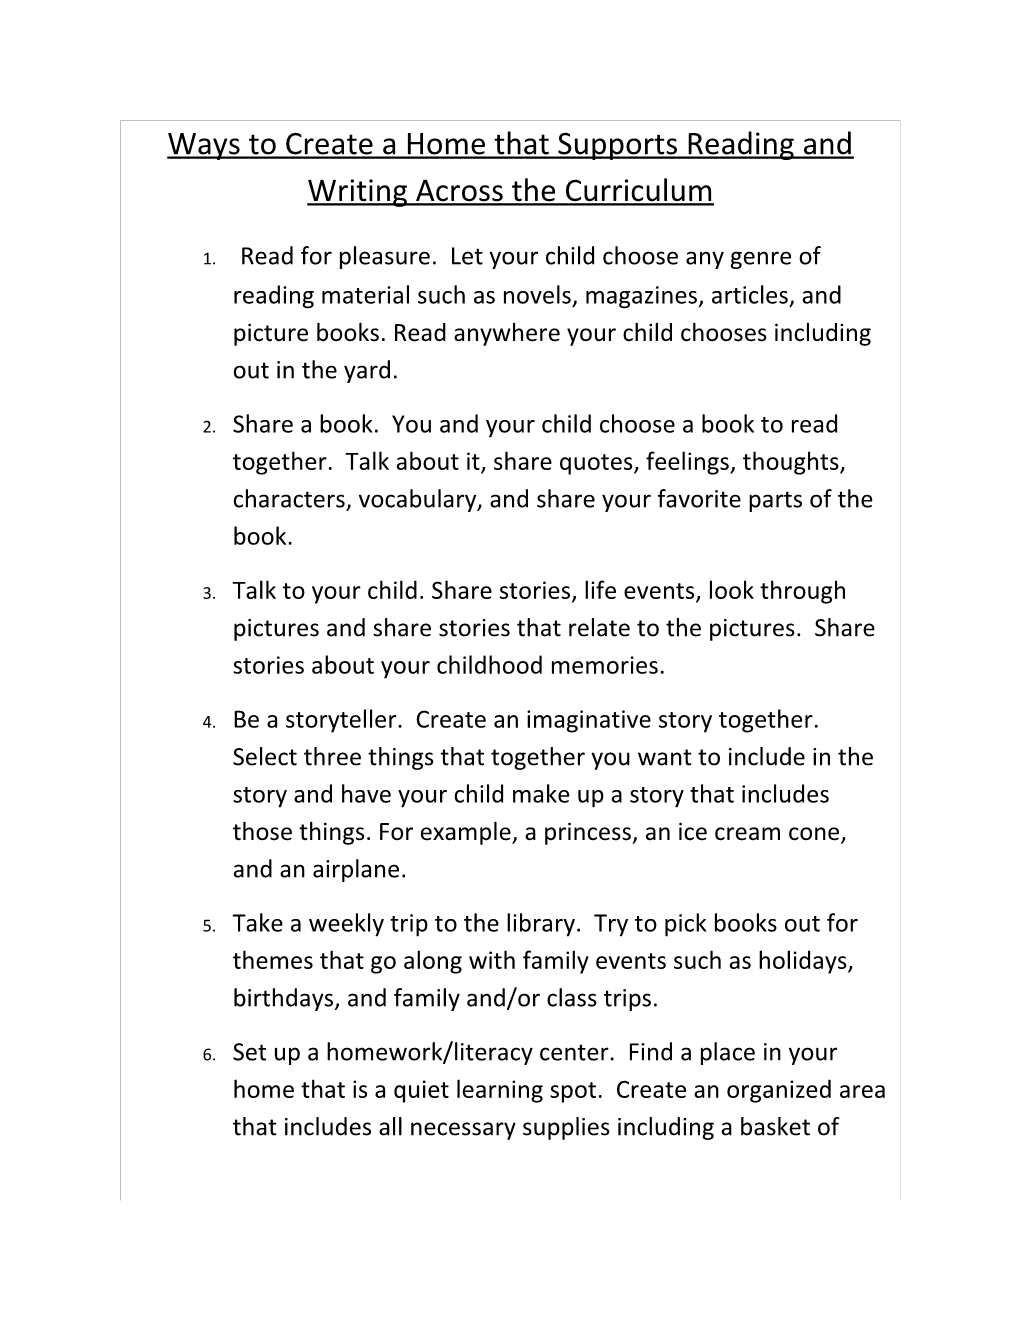 Ways to Create a Home That Supports Reading and Writing Across the Curriculum